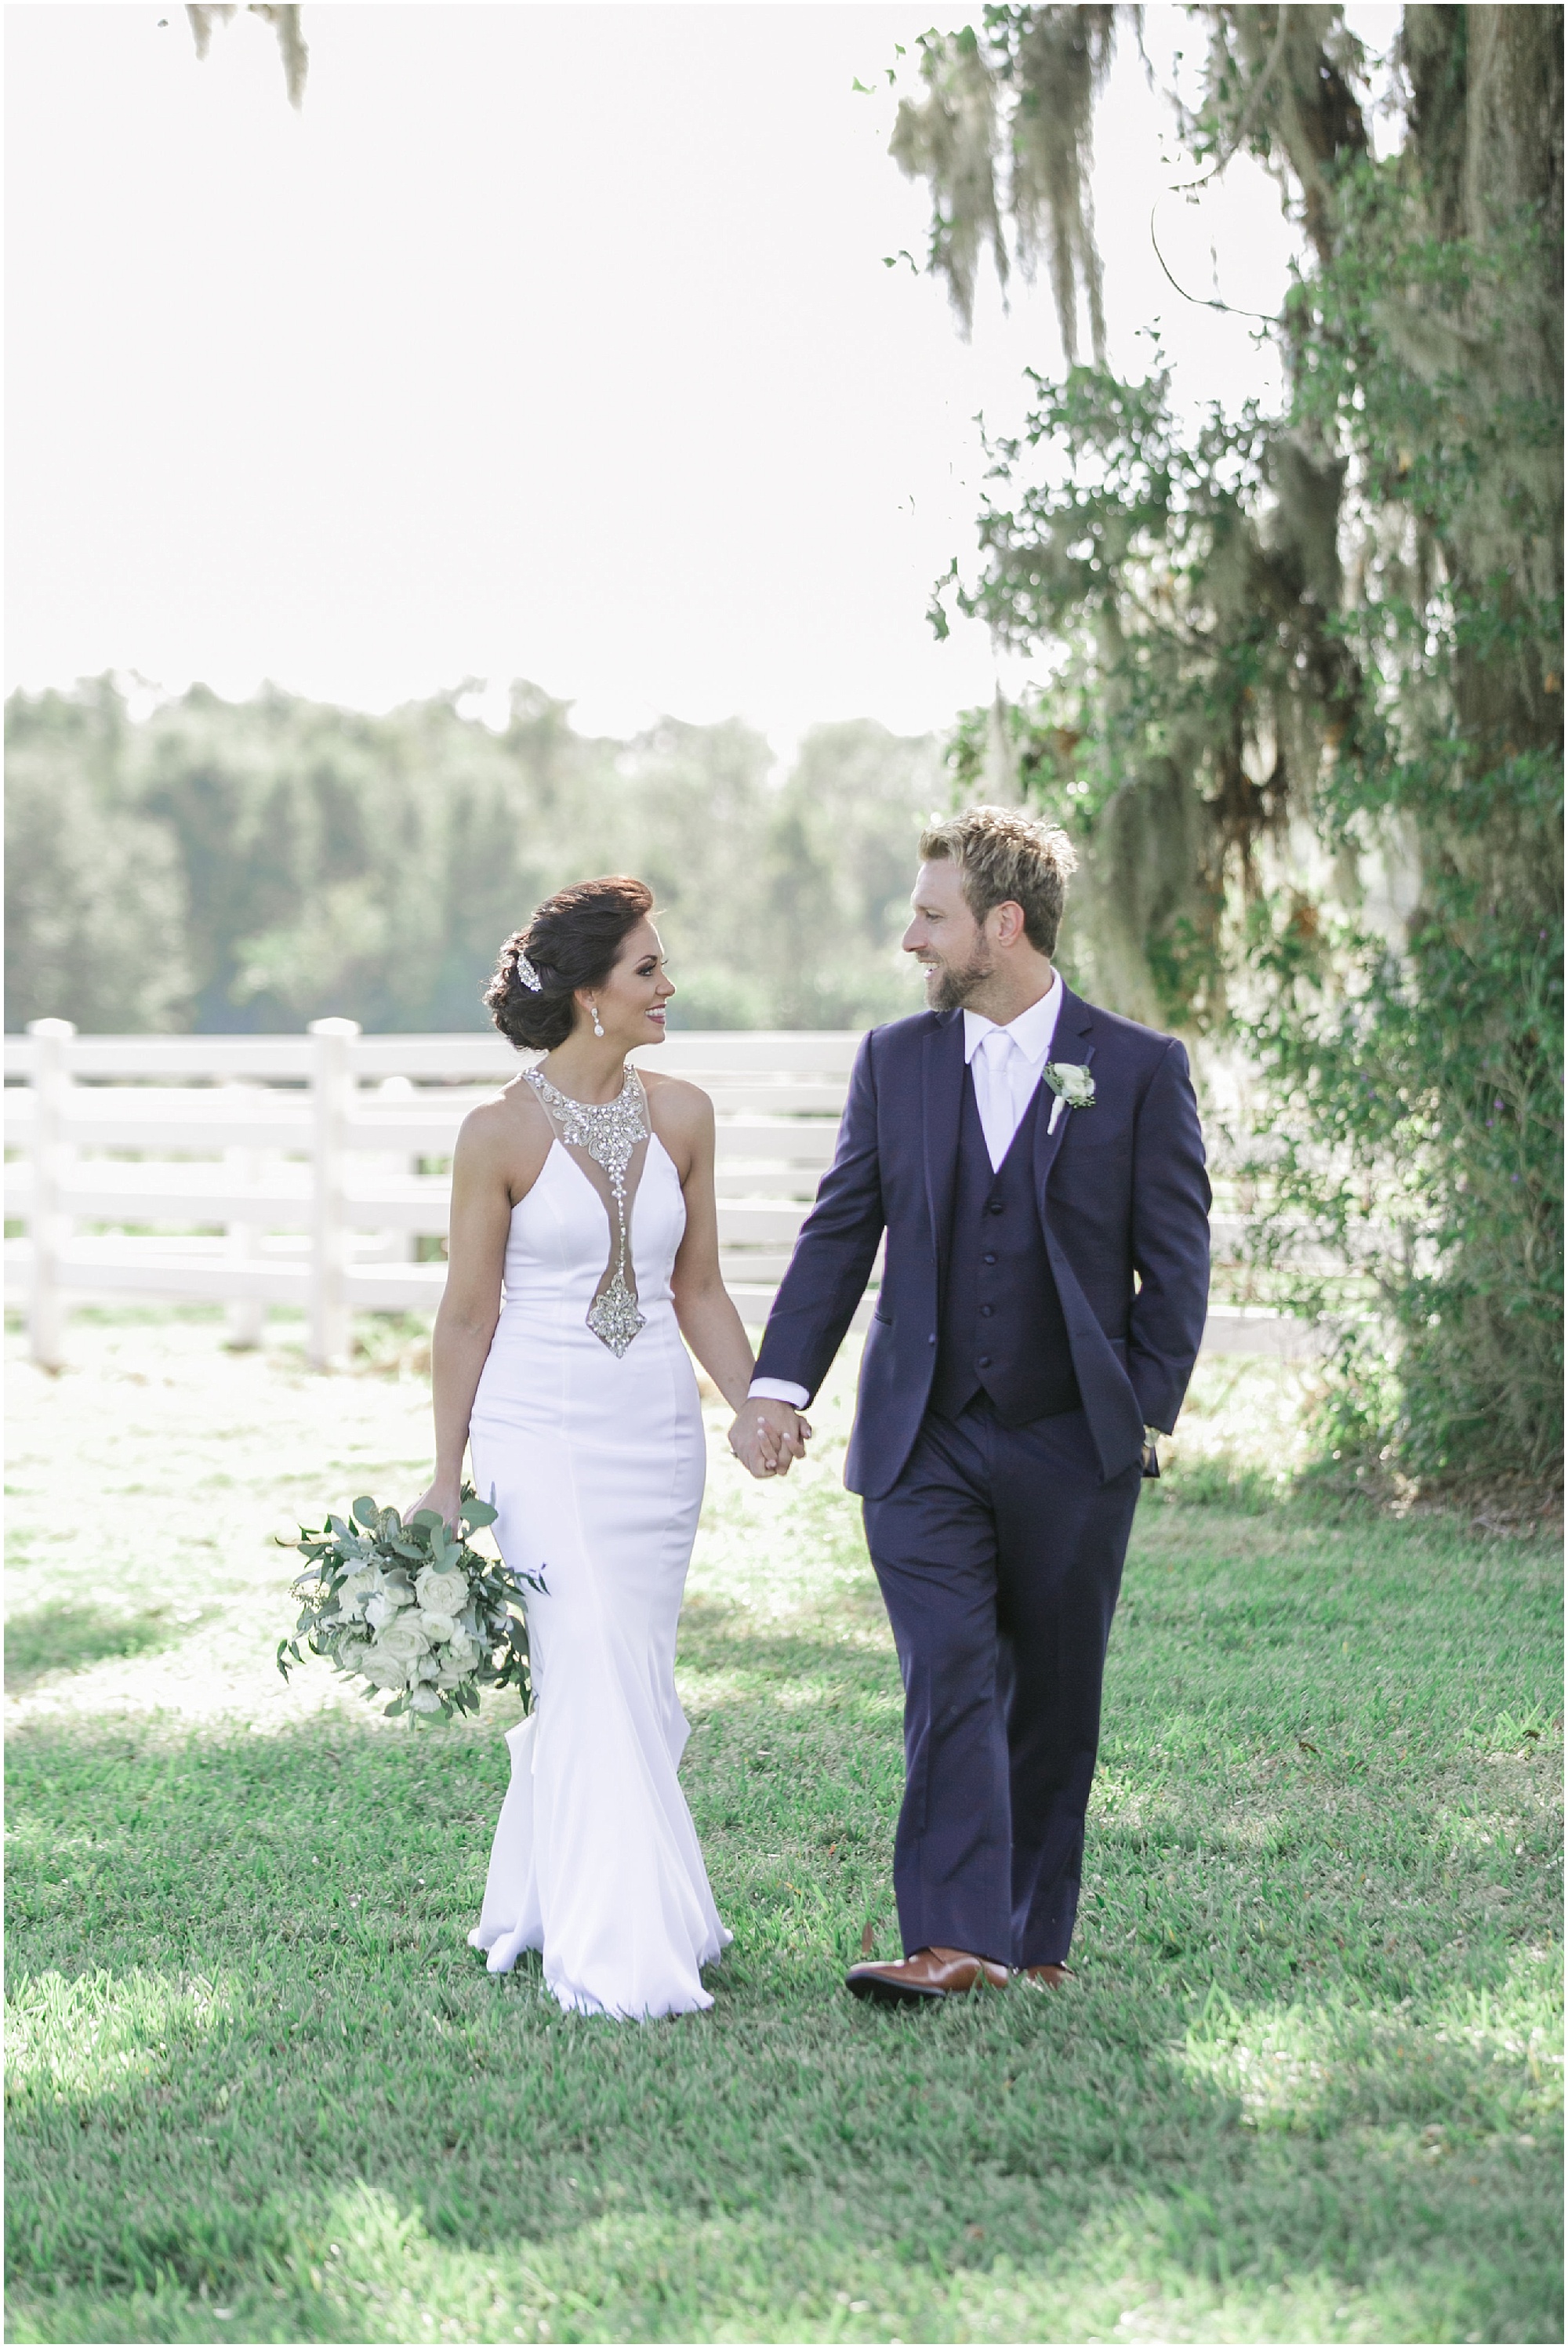 Southern Elegance bride and groom walking and holding hands.